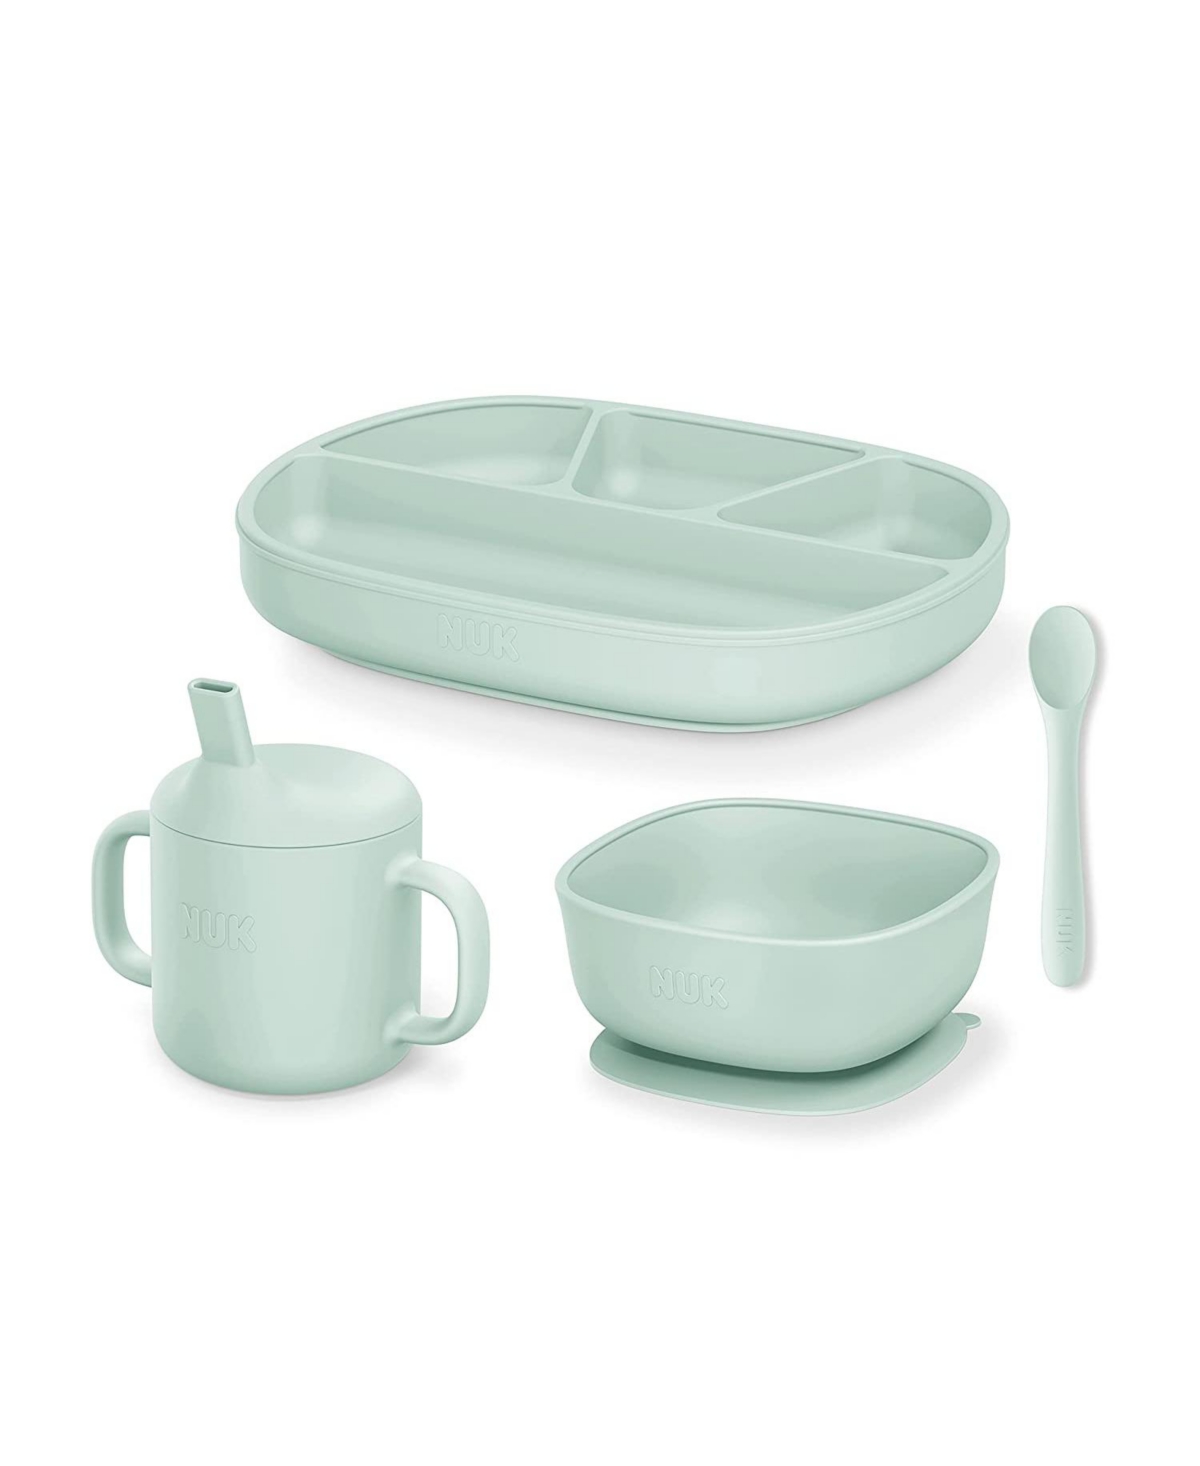 Nuk 4 Piece Silicone Baby Tableware Set In Light/pastel Green